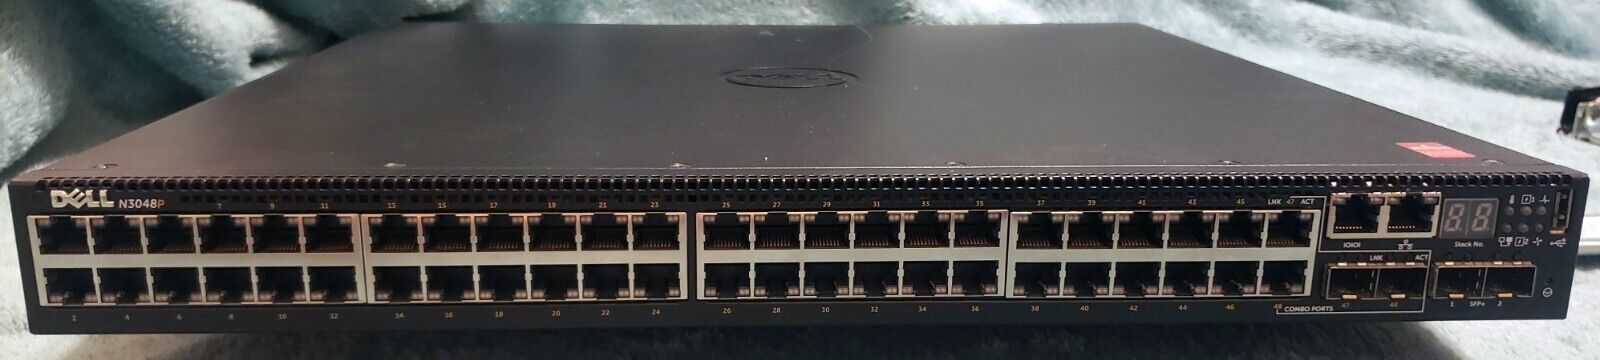 Dell Networking N3048P 48-Port PoE+ Network Switch w/ Dual Power Rack Mount Kit